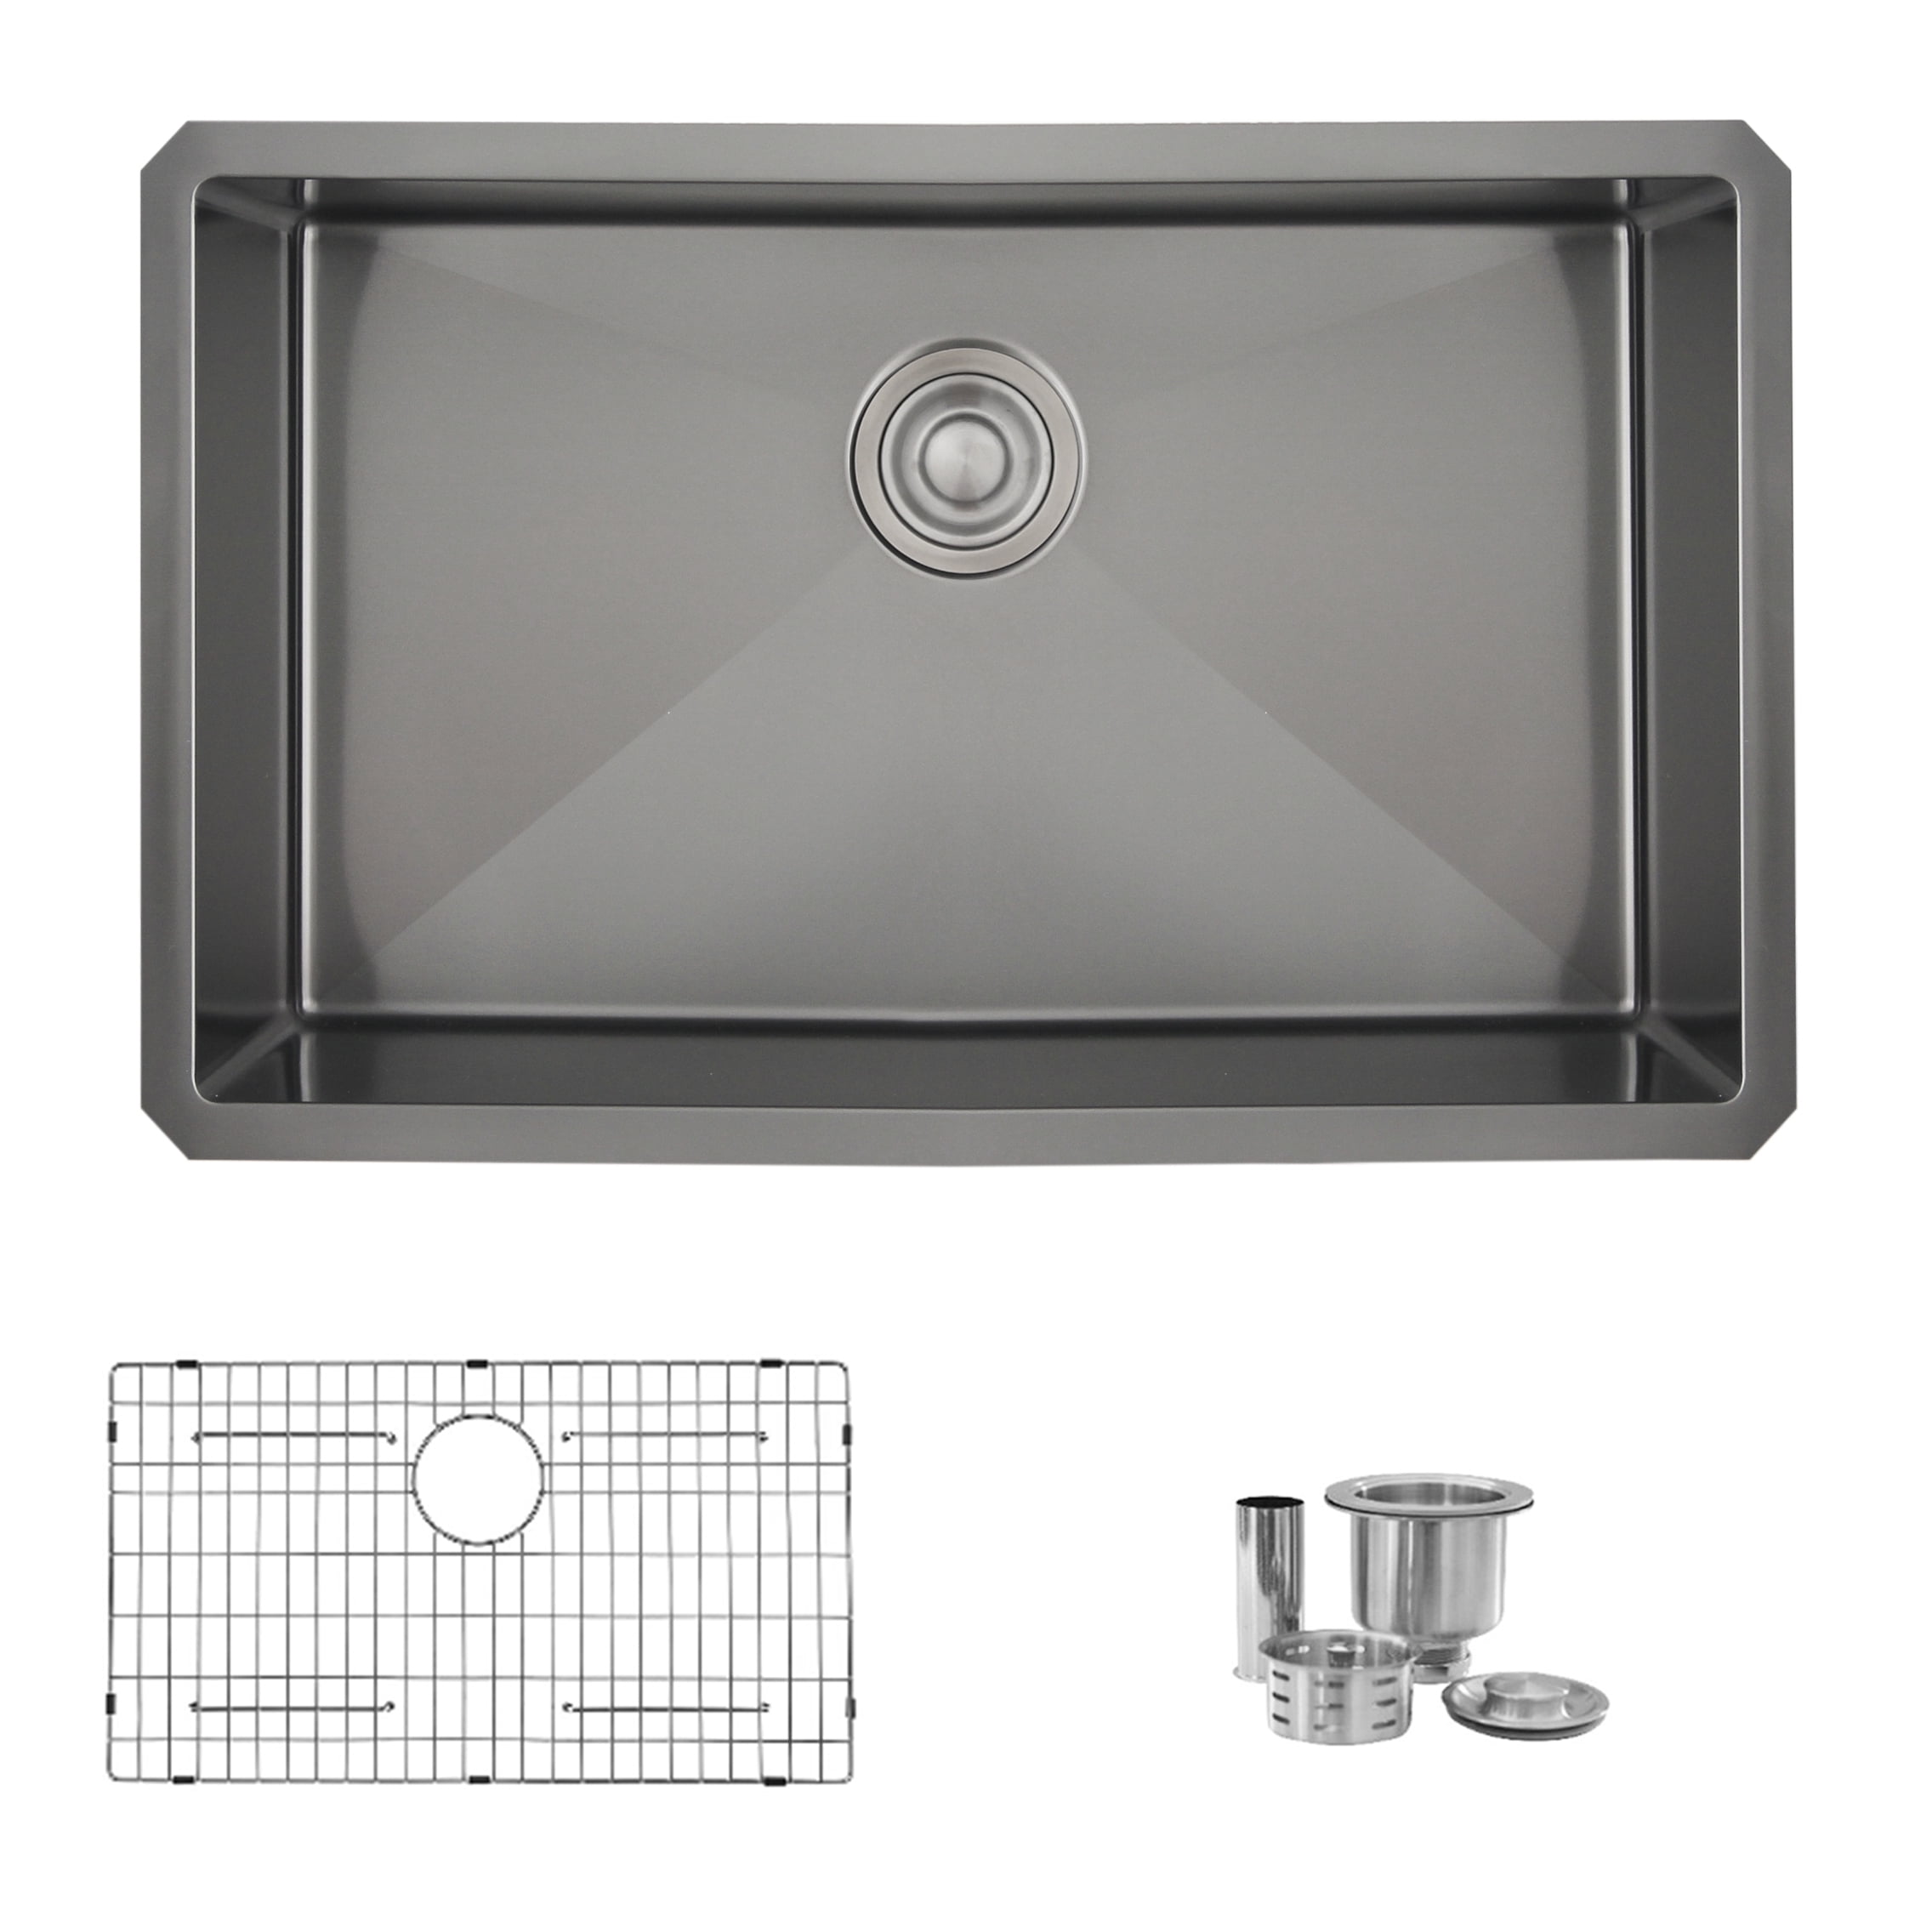 Stylish S-321XG 32 inch Slim Low Divider Double Bowl Undermount Stainless Steel Kitchen Sink